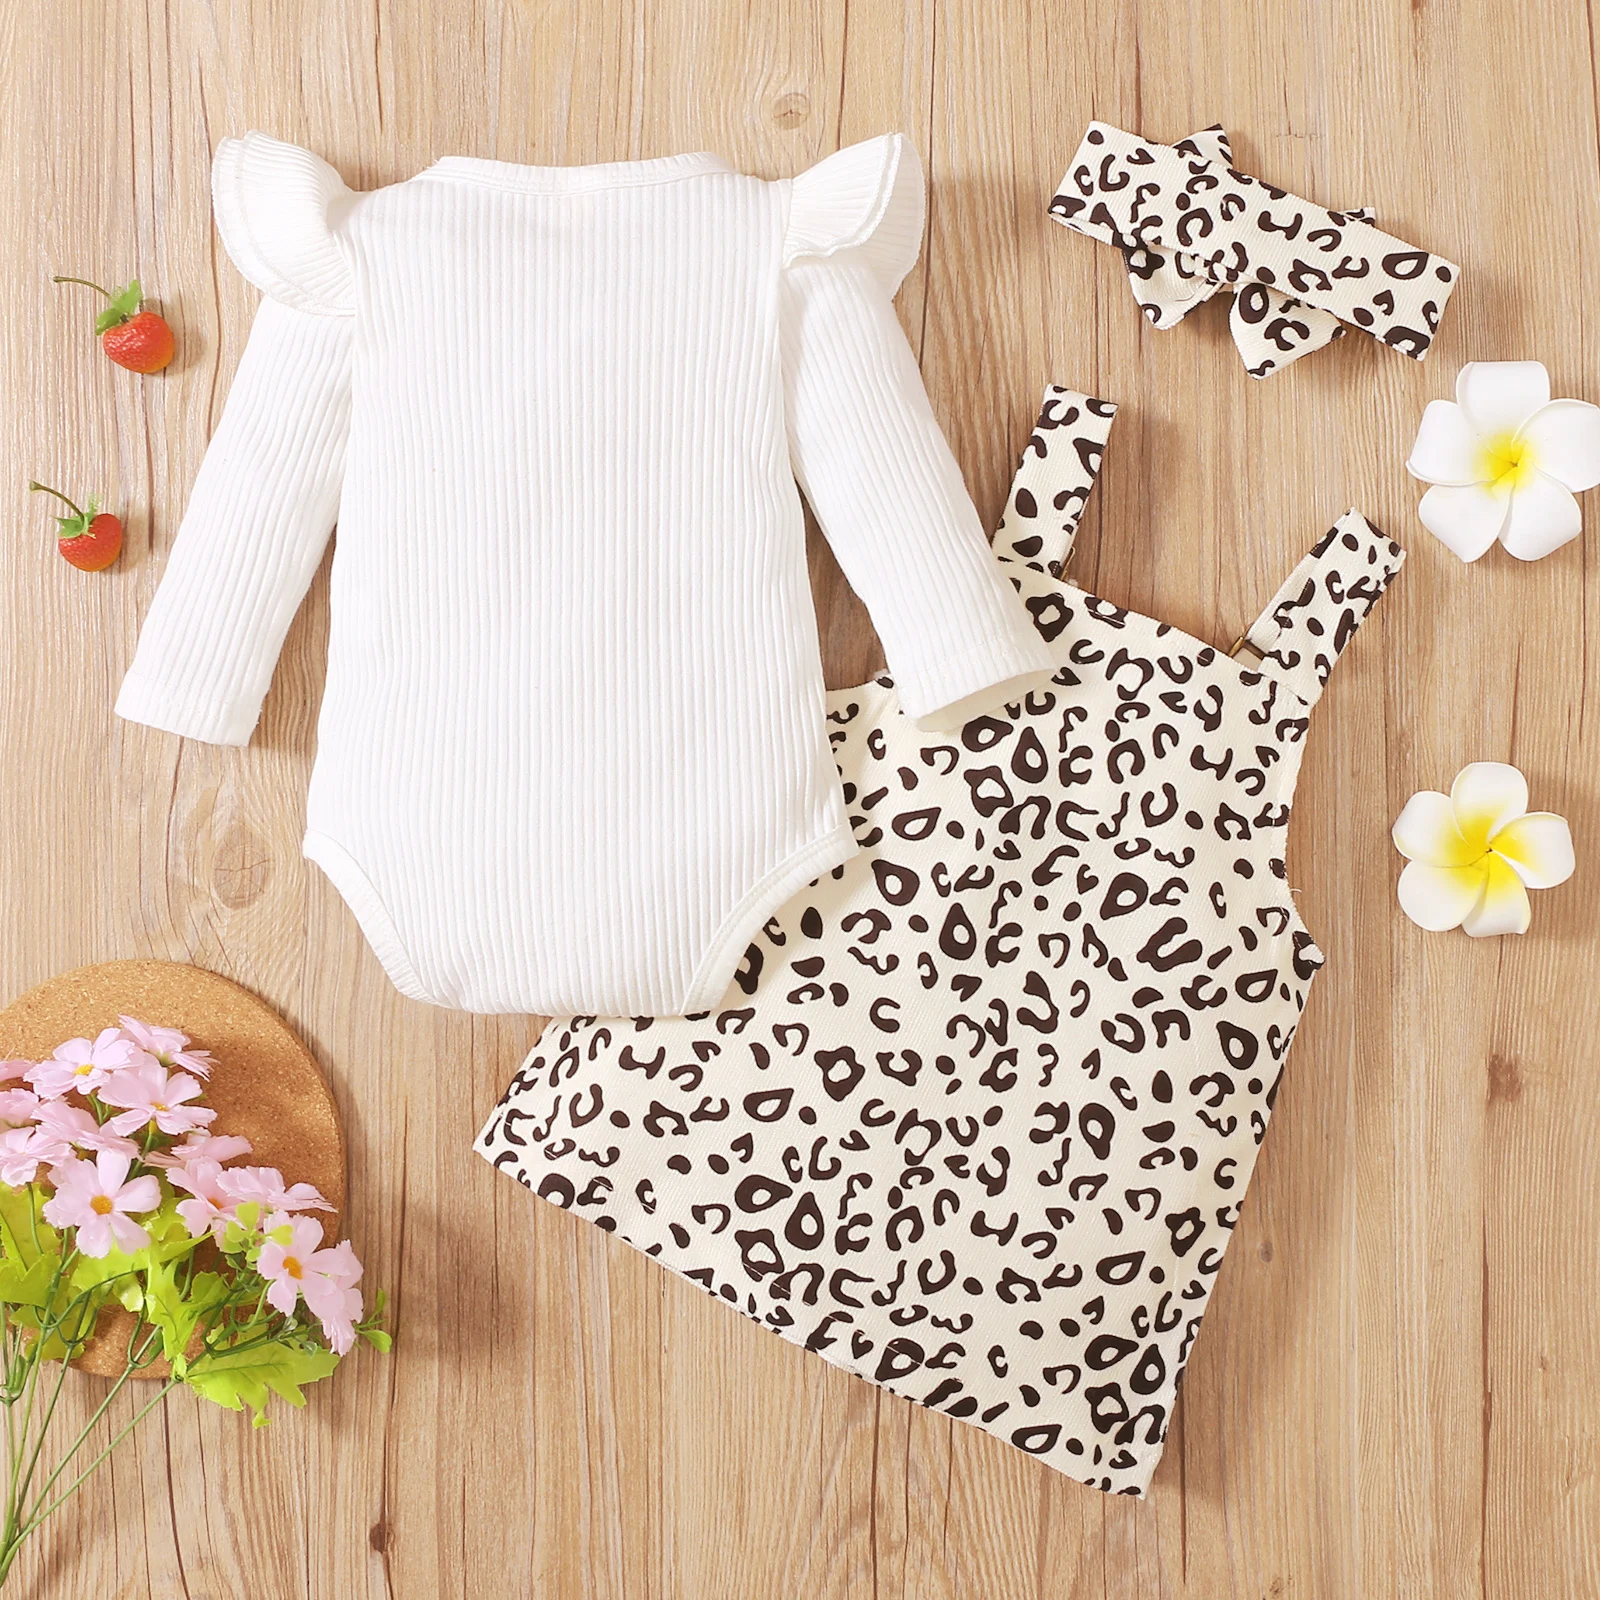 baby clothes penguin set Ma&Baby 0-18M Newborn Infant Baby Girls Clothes Set Ruffles Long Sleeve Rompers Leopard Strap Dress Autumn Spring Outfits D95 Baby Clothing Set medium